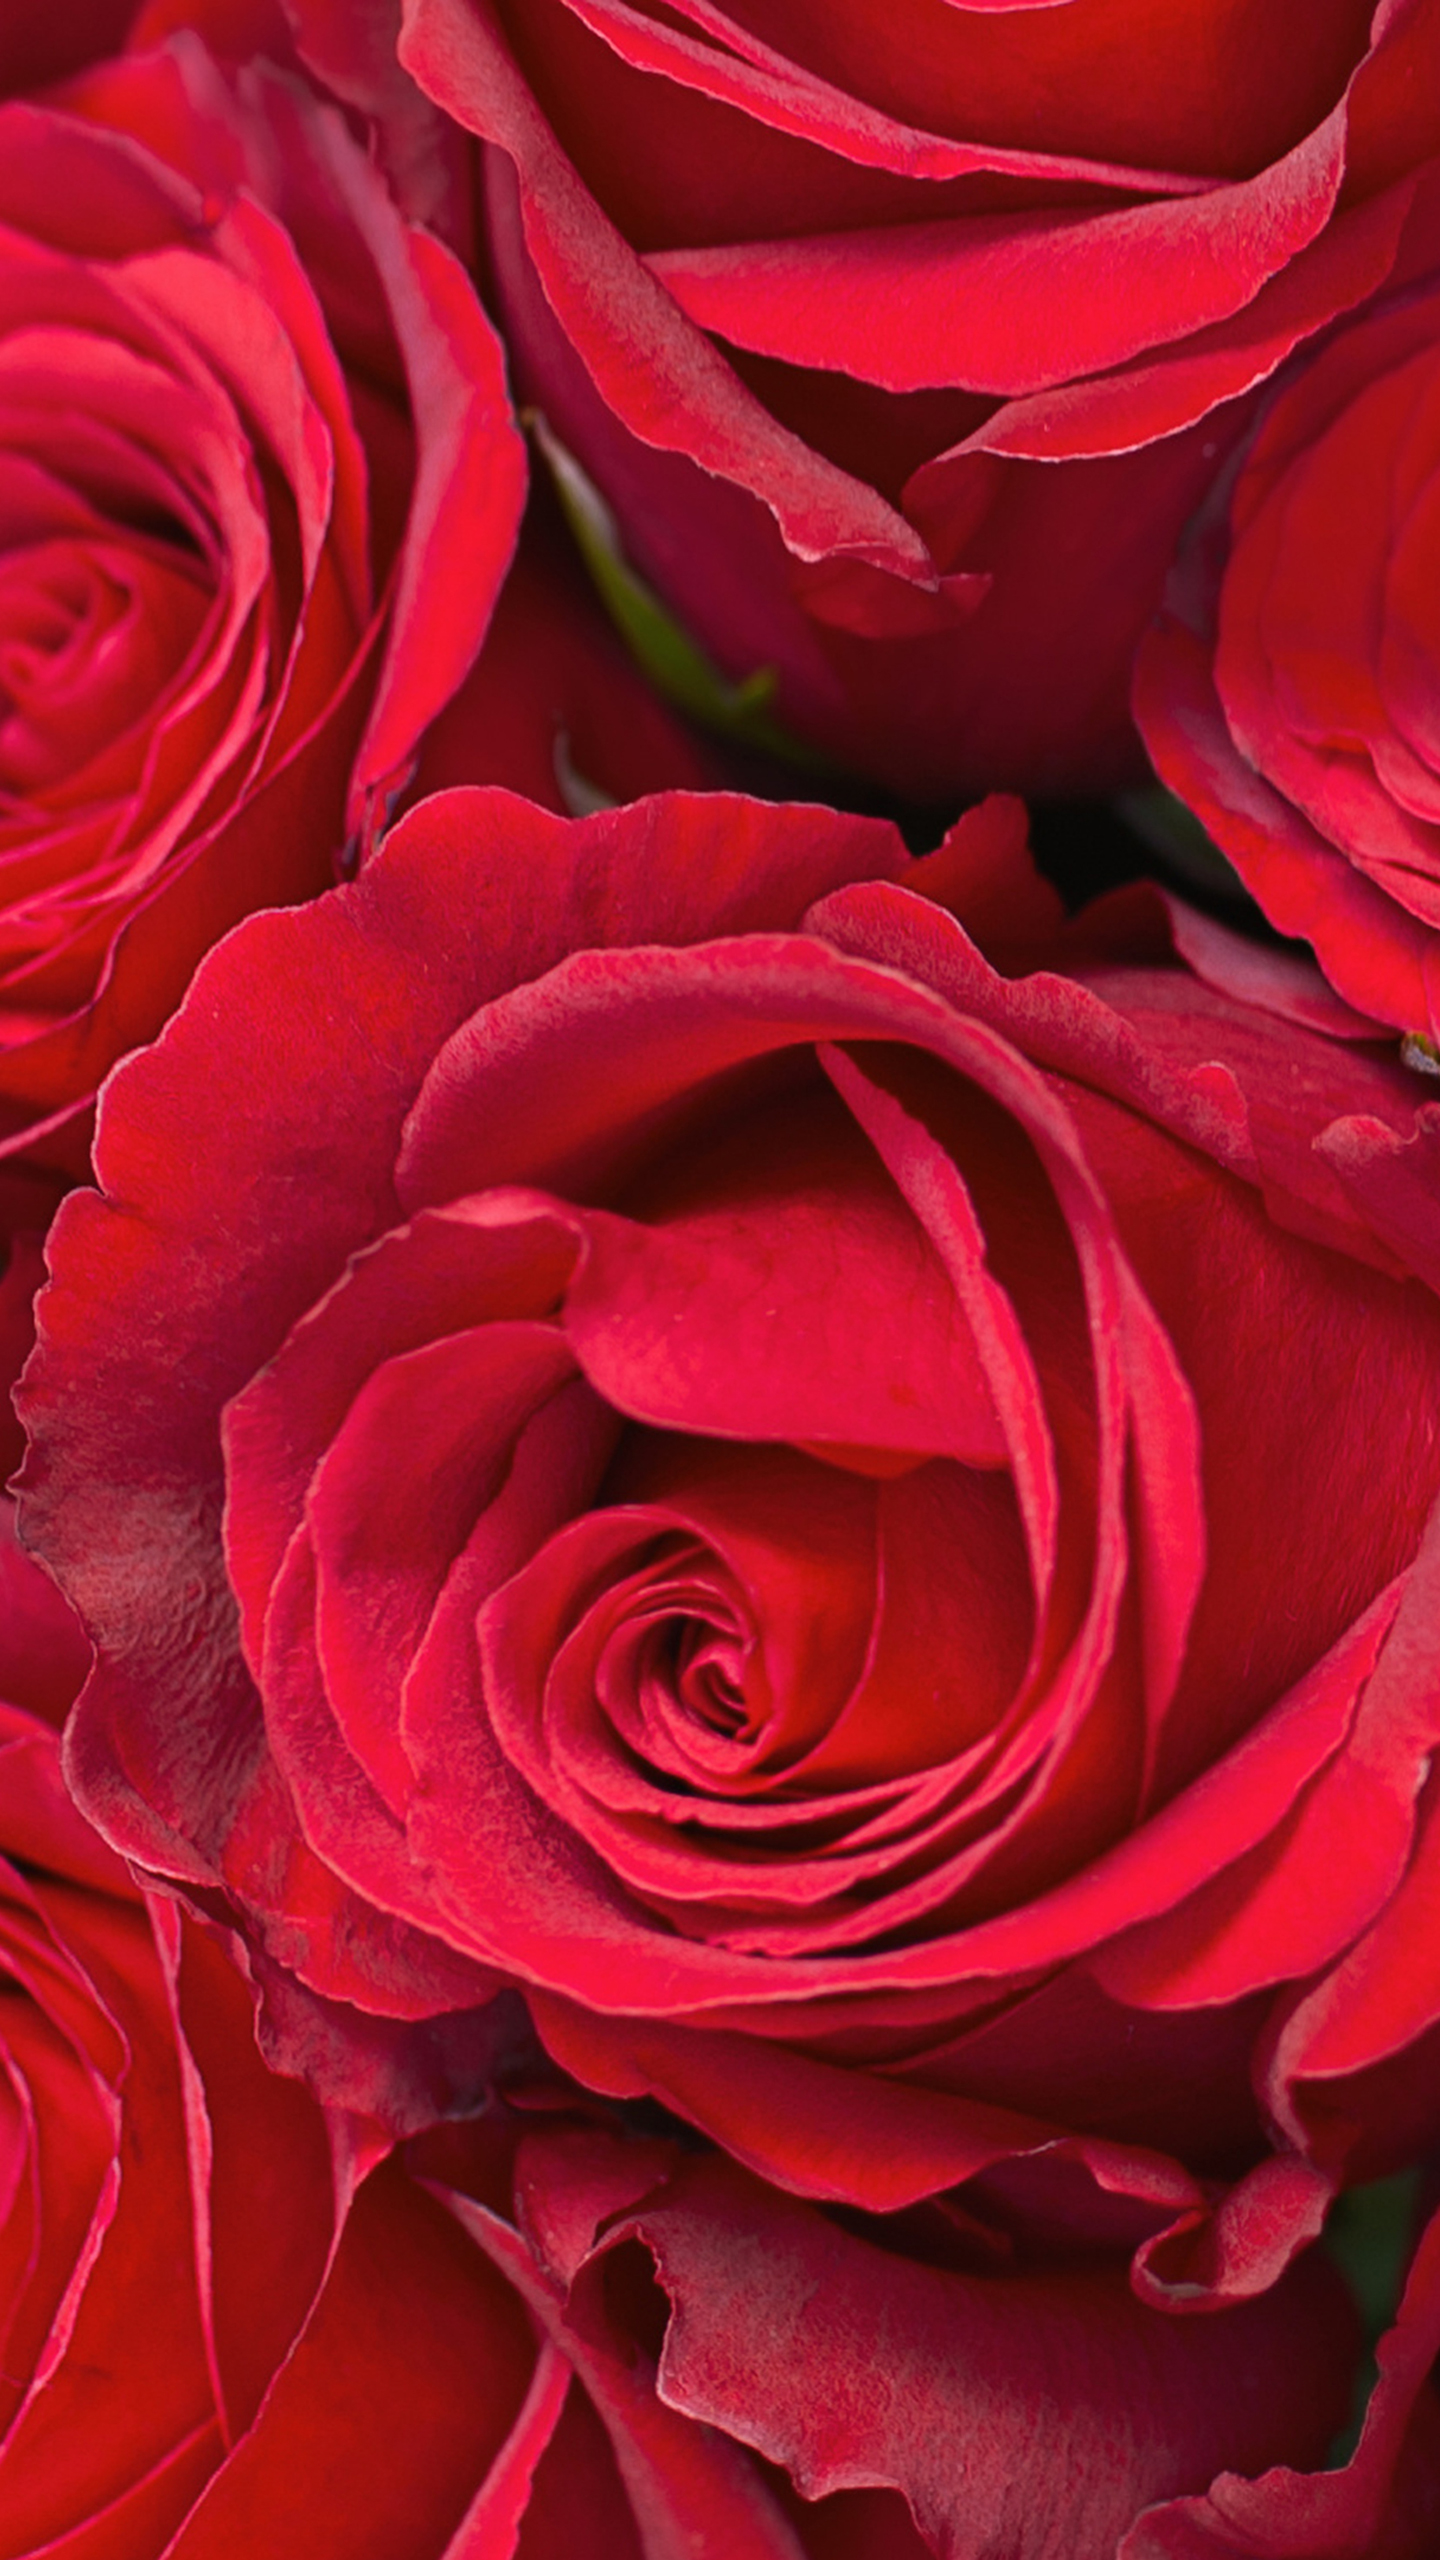 Samsung Galaxy S7 Red Roses Wallpaper Gallery Yopriceville 1440x2560